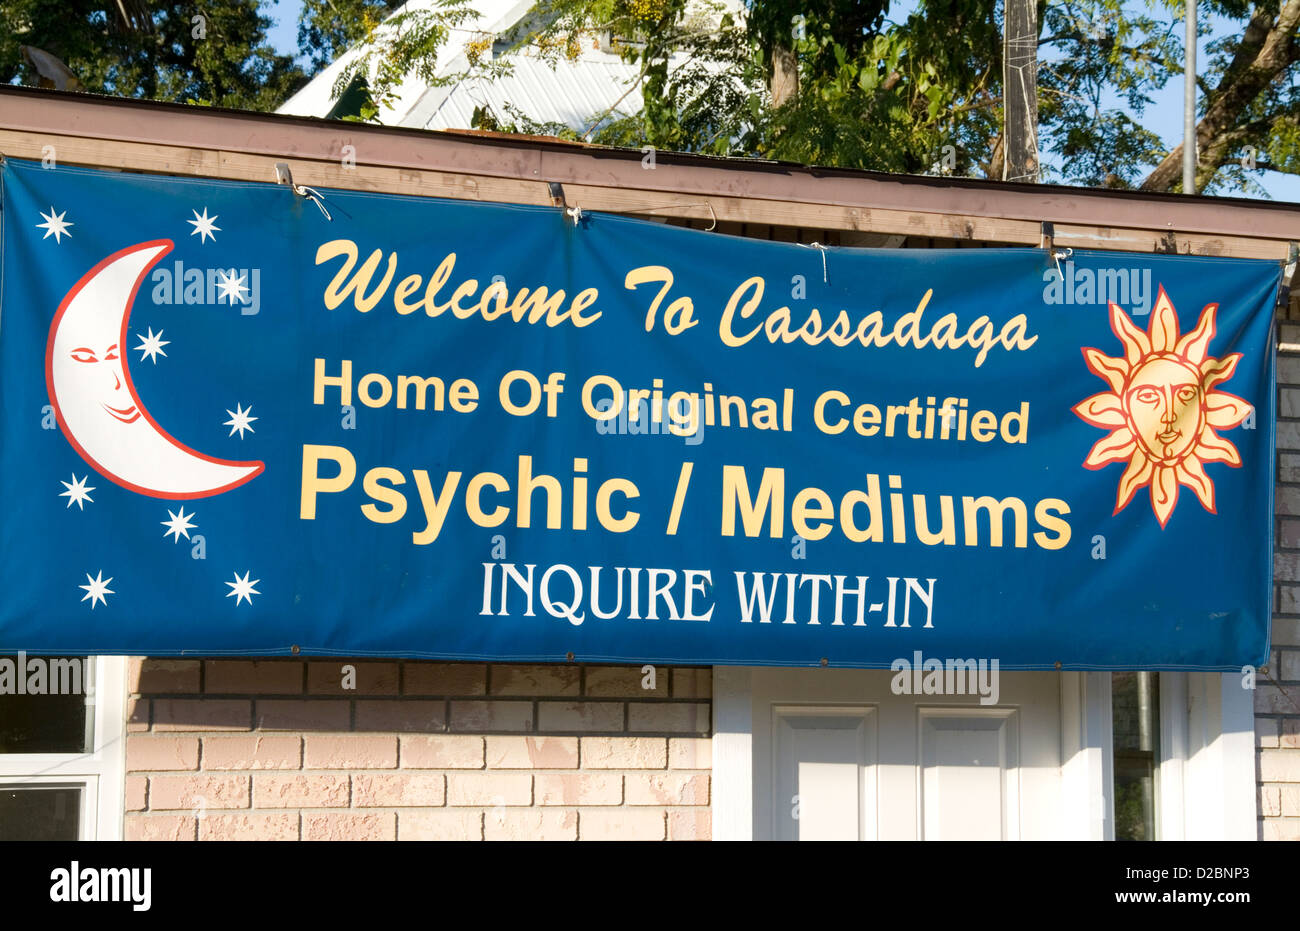 Spiritualism Signs For Fortune Tellers And Mediums In Psychic Village Of Cassadaga Florida Stock Photo